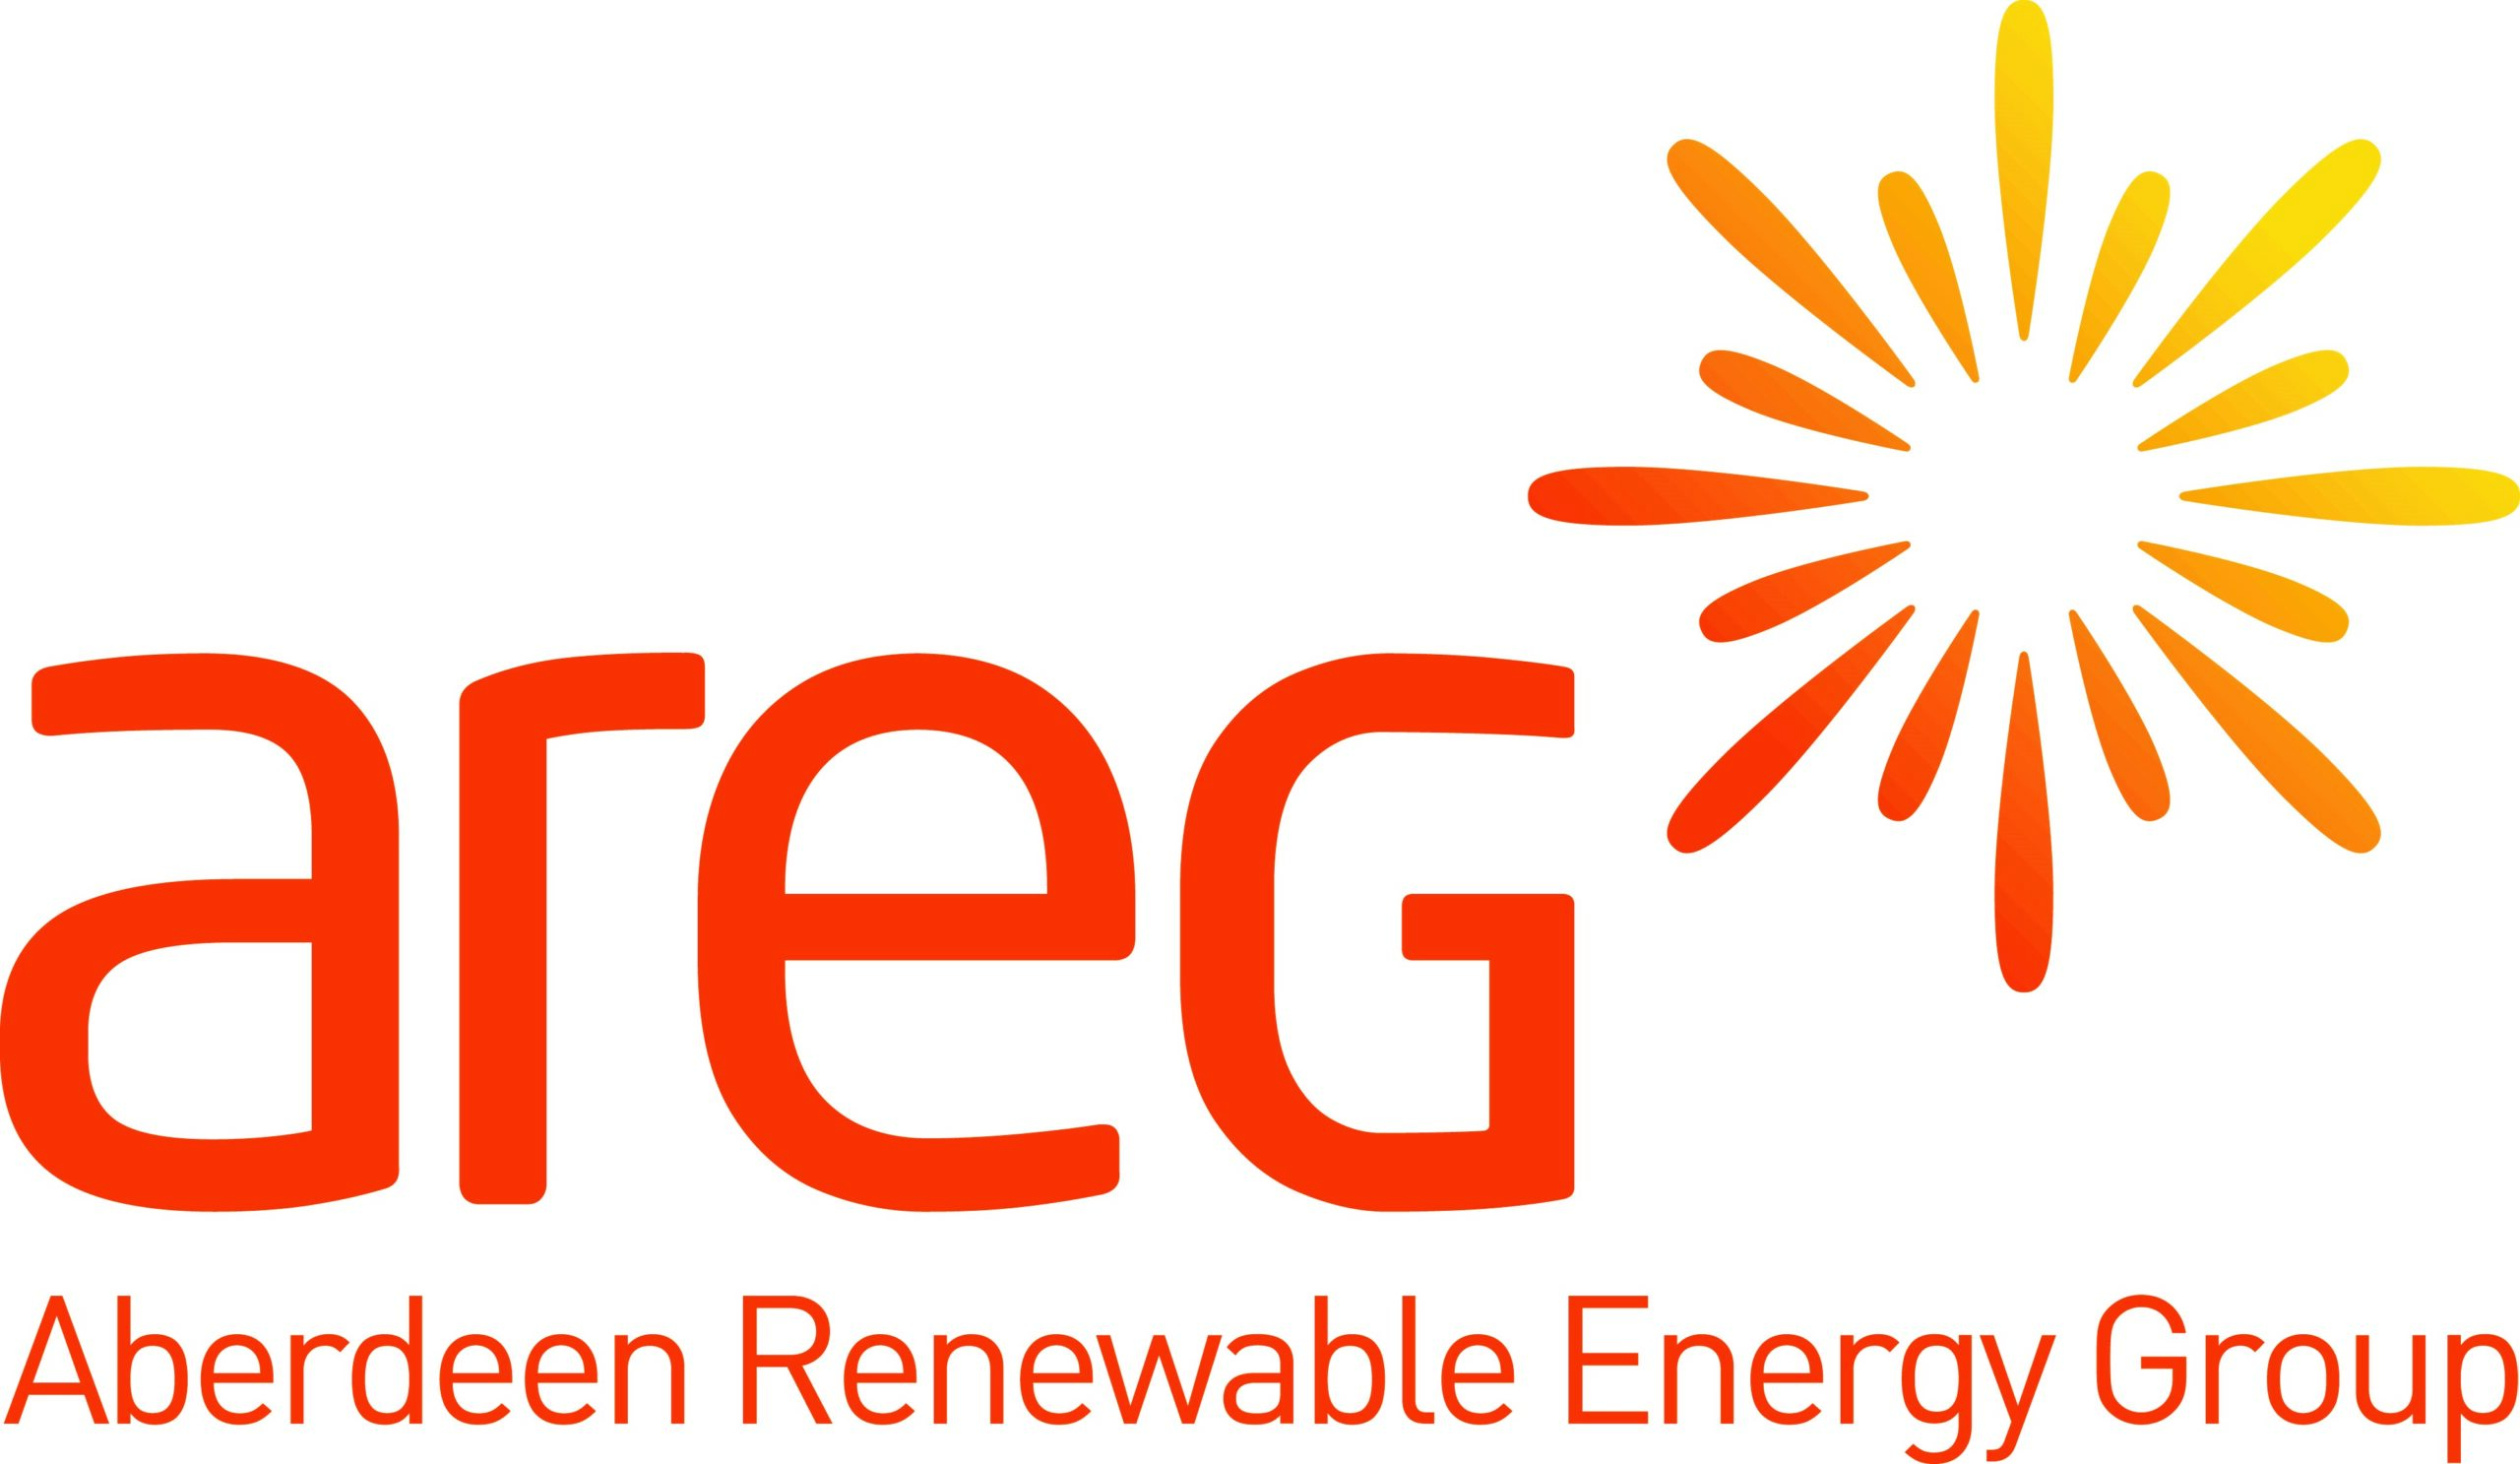 AREG NEWS: AREG is recruiting for three roles to support its growth ambitions and membership community